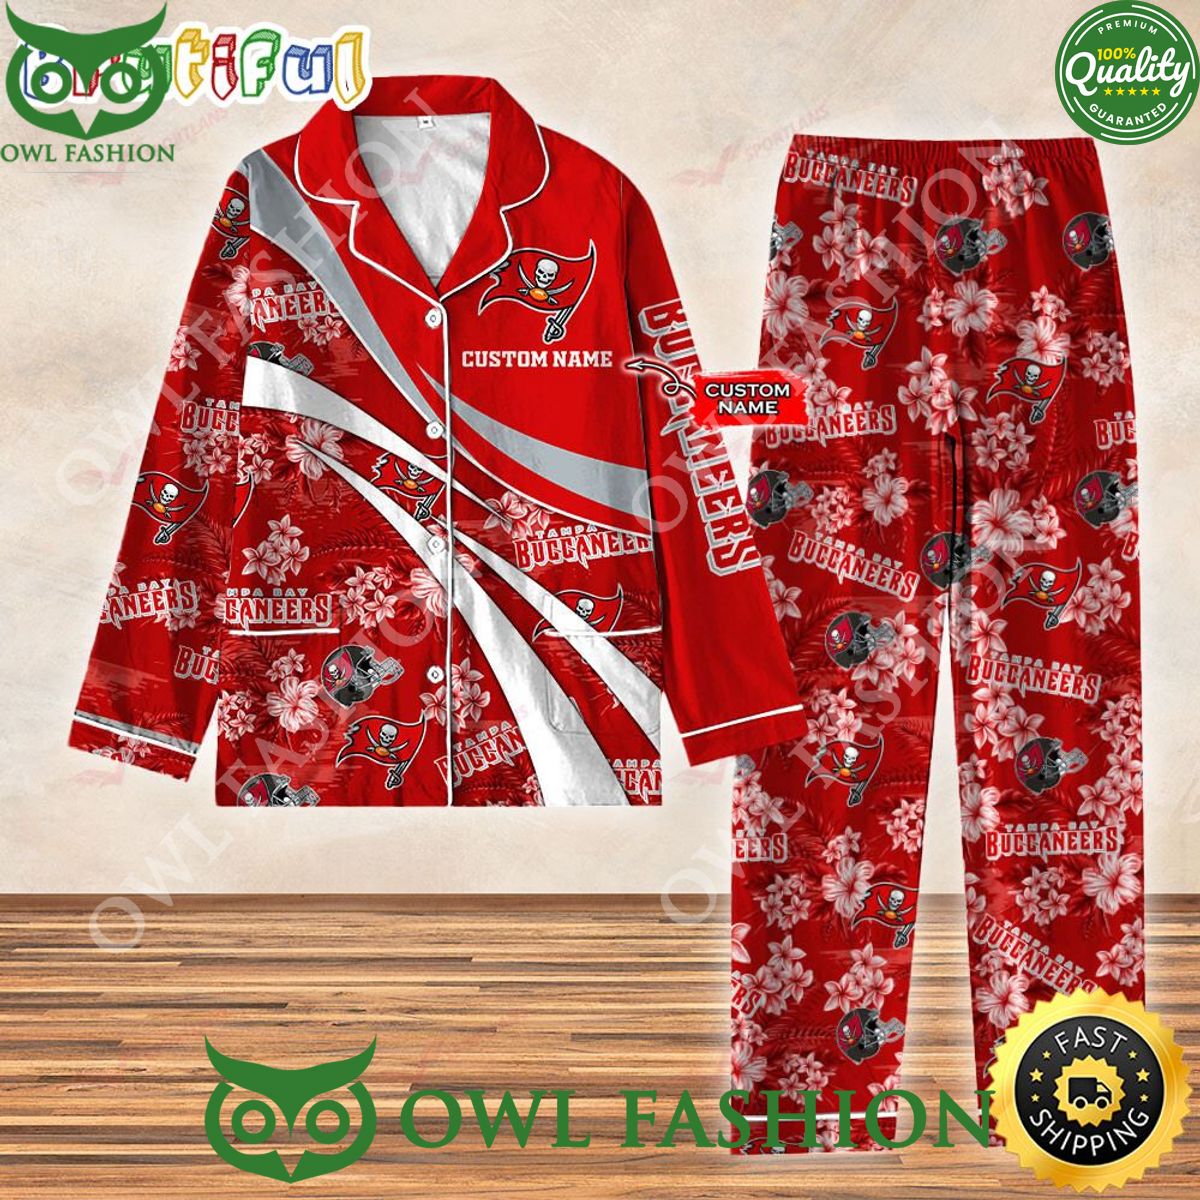 trending tampa bay buccaneers nfl 3d personalized pajamas set 1 a8hed.jpg